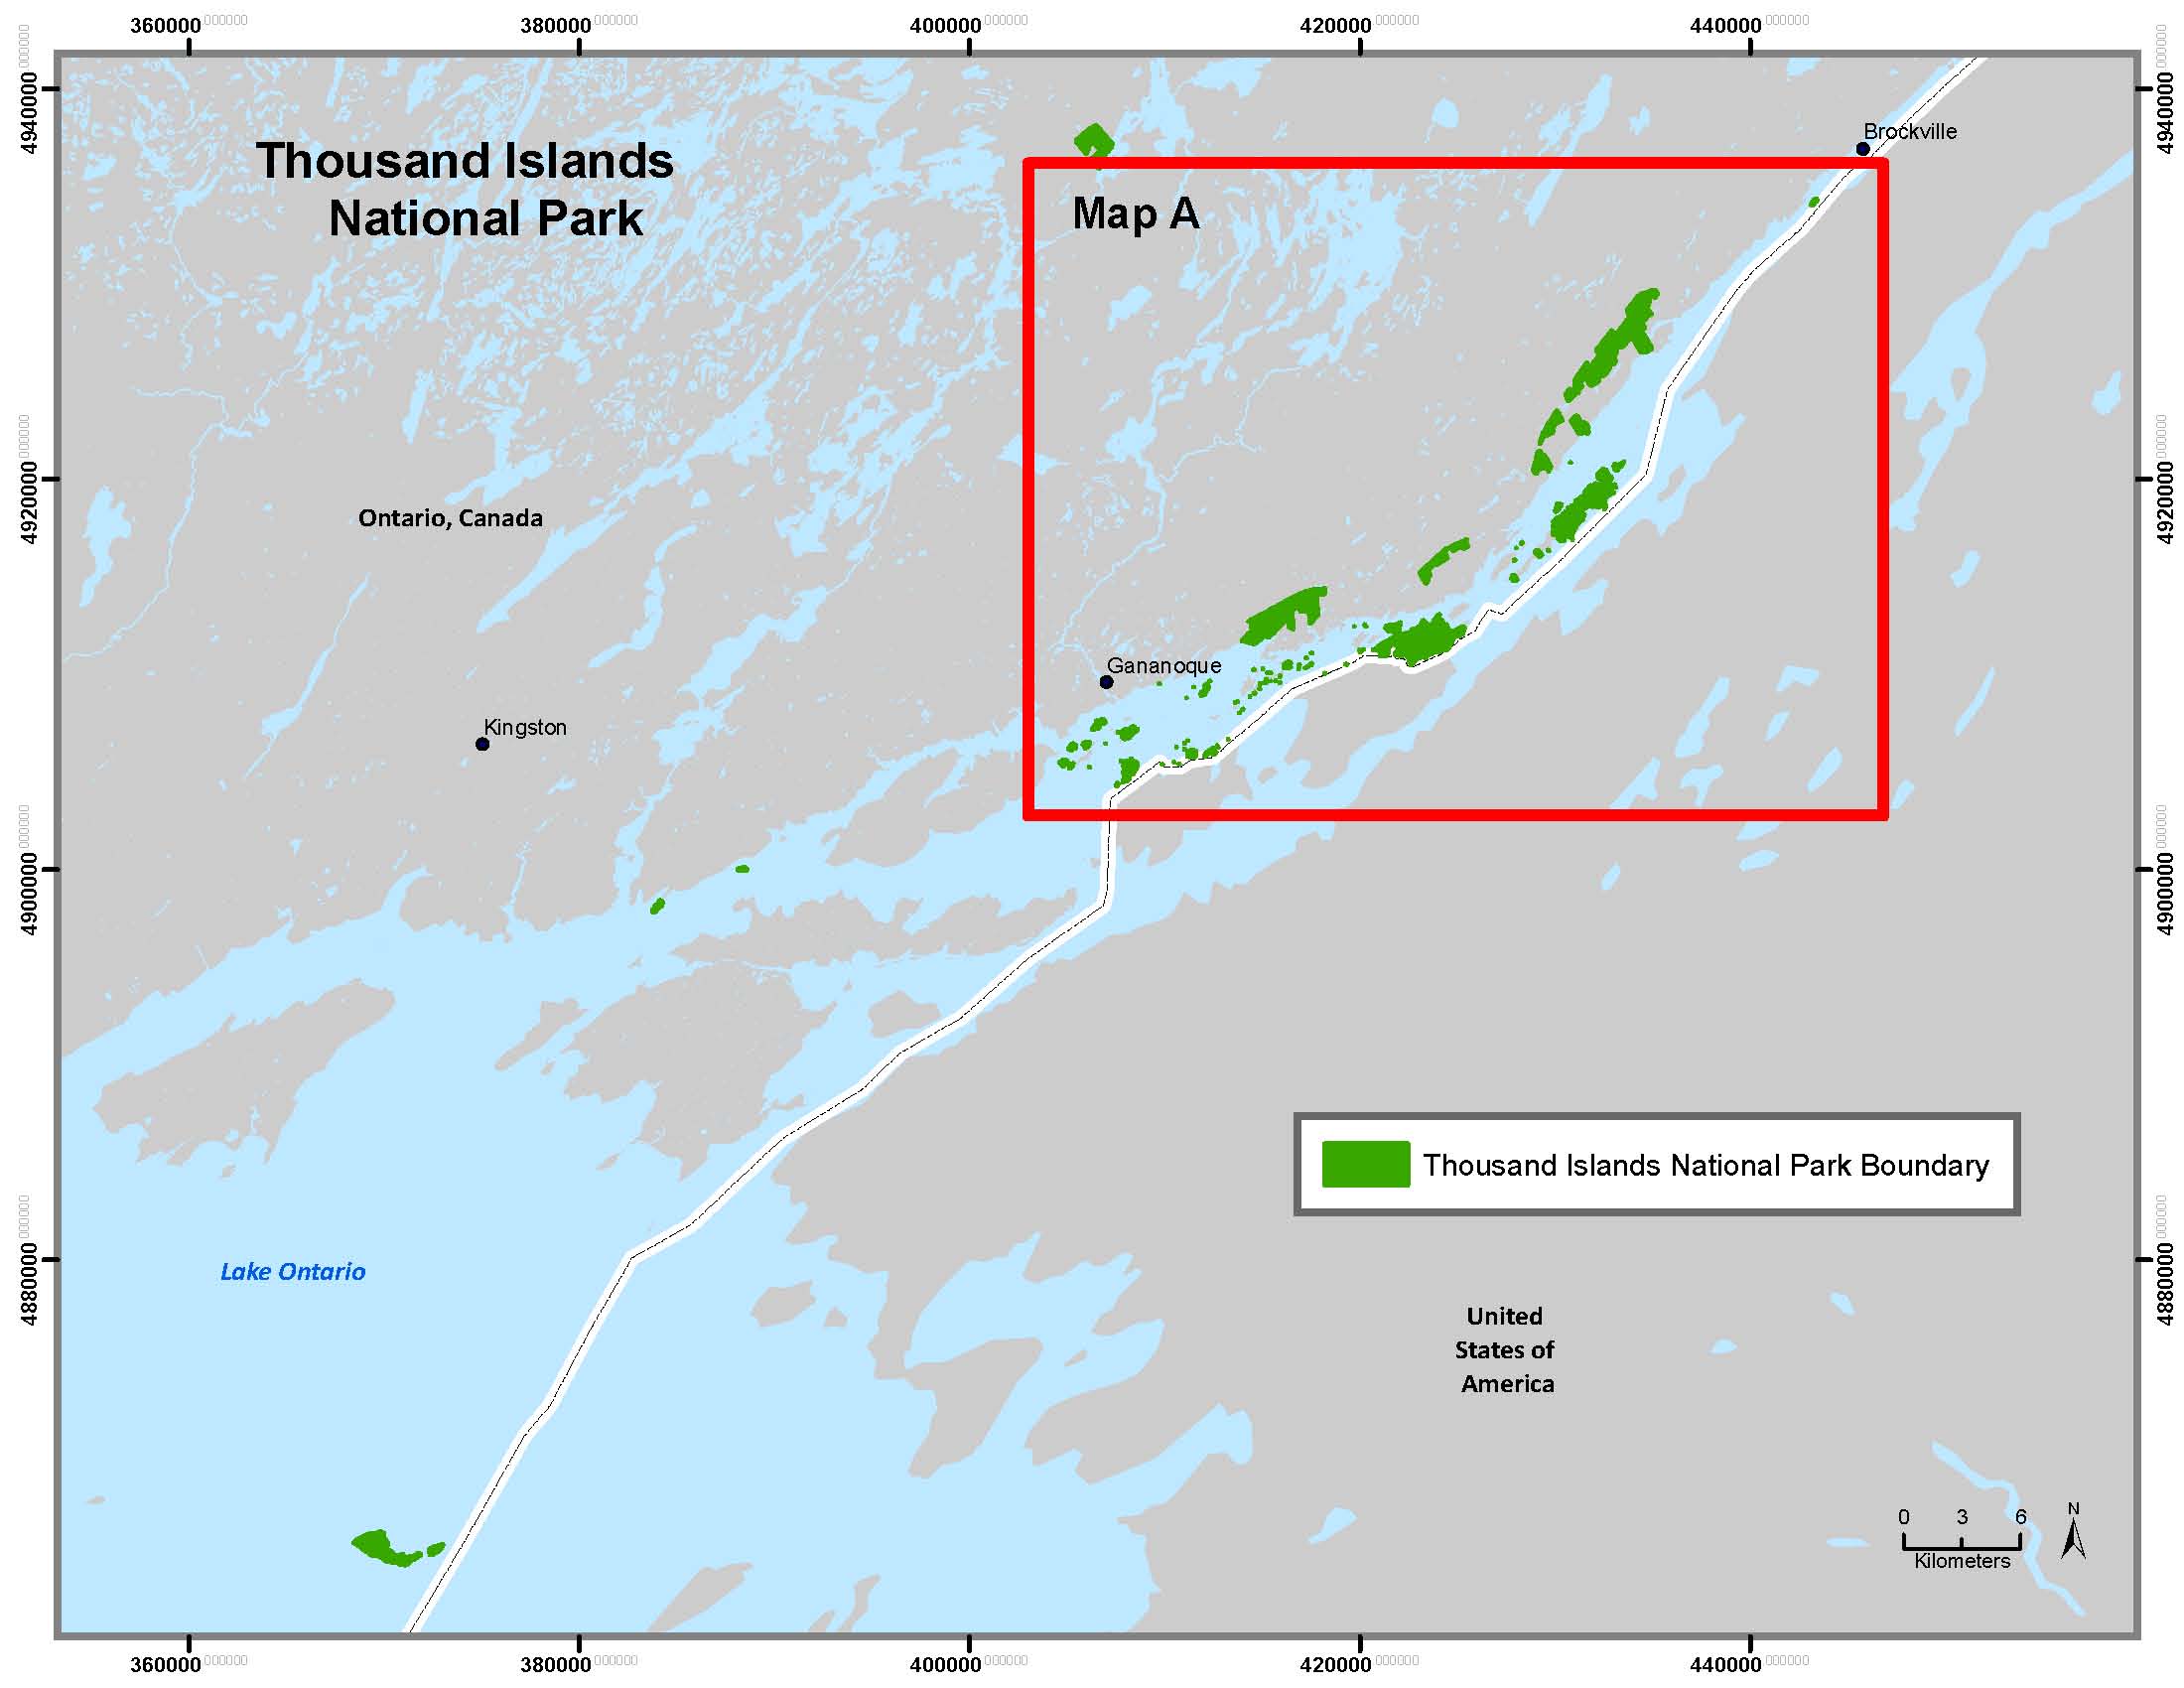 Map of Thousand Islands National Park of Canada with colour to indicate its boundary.